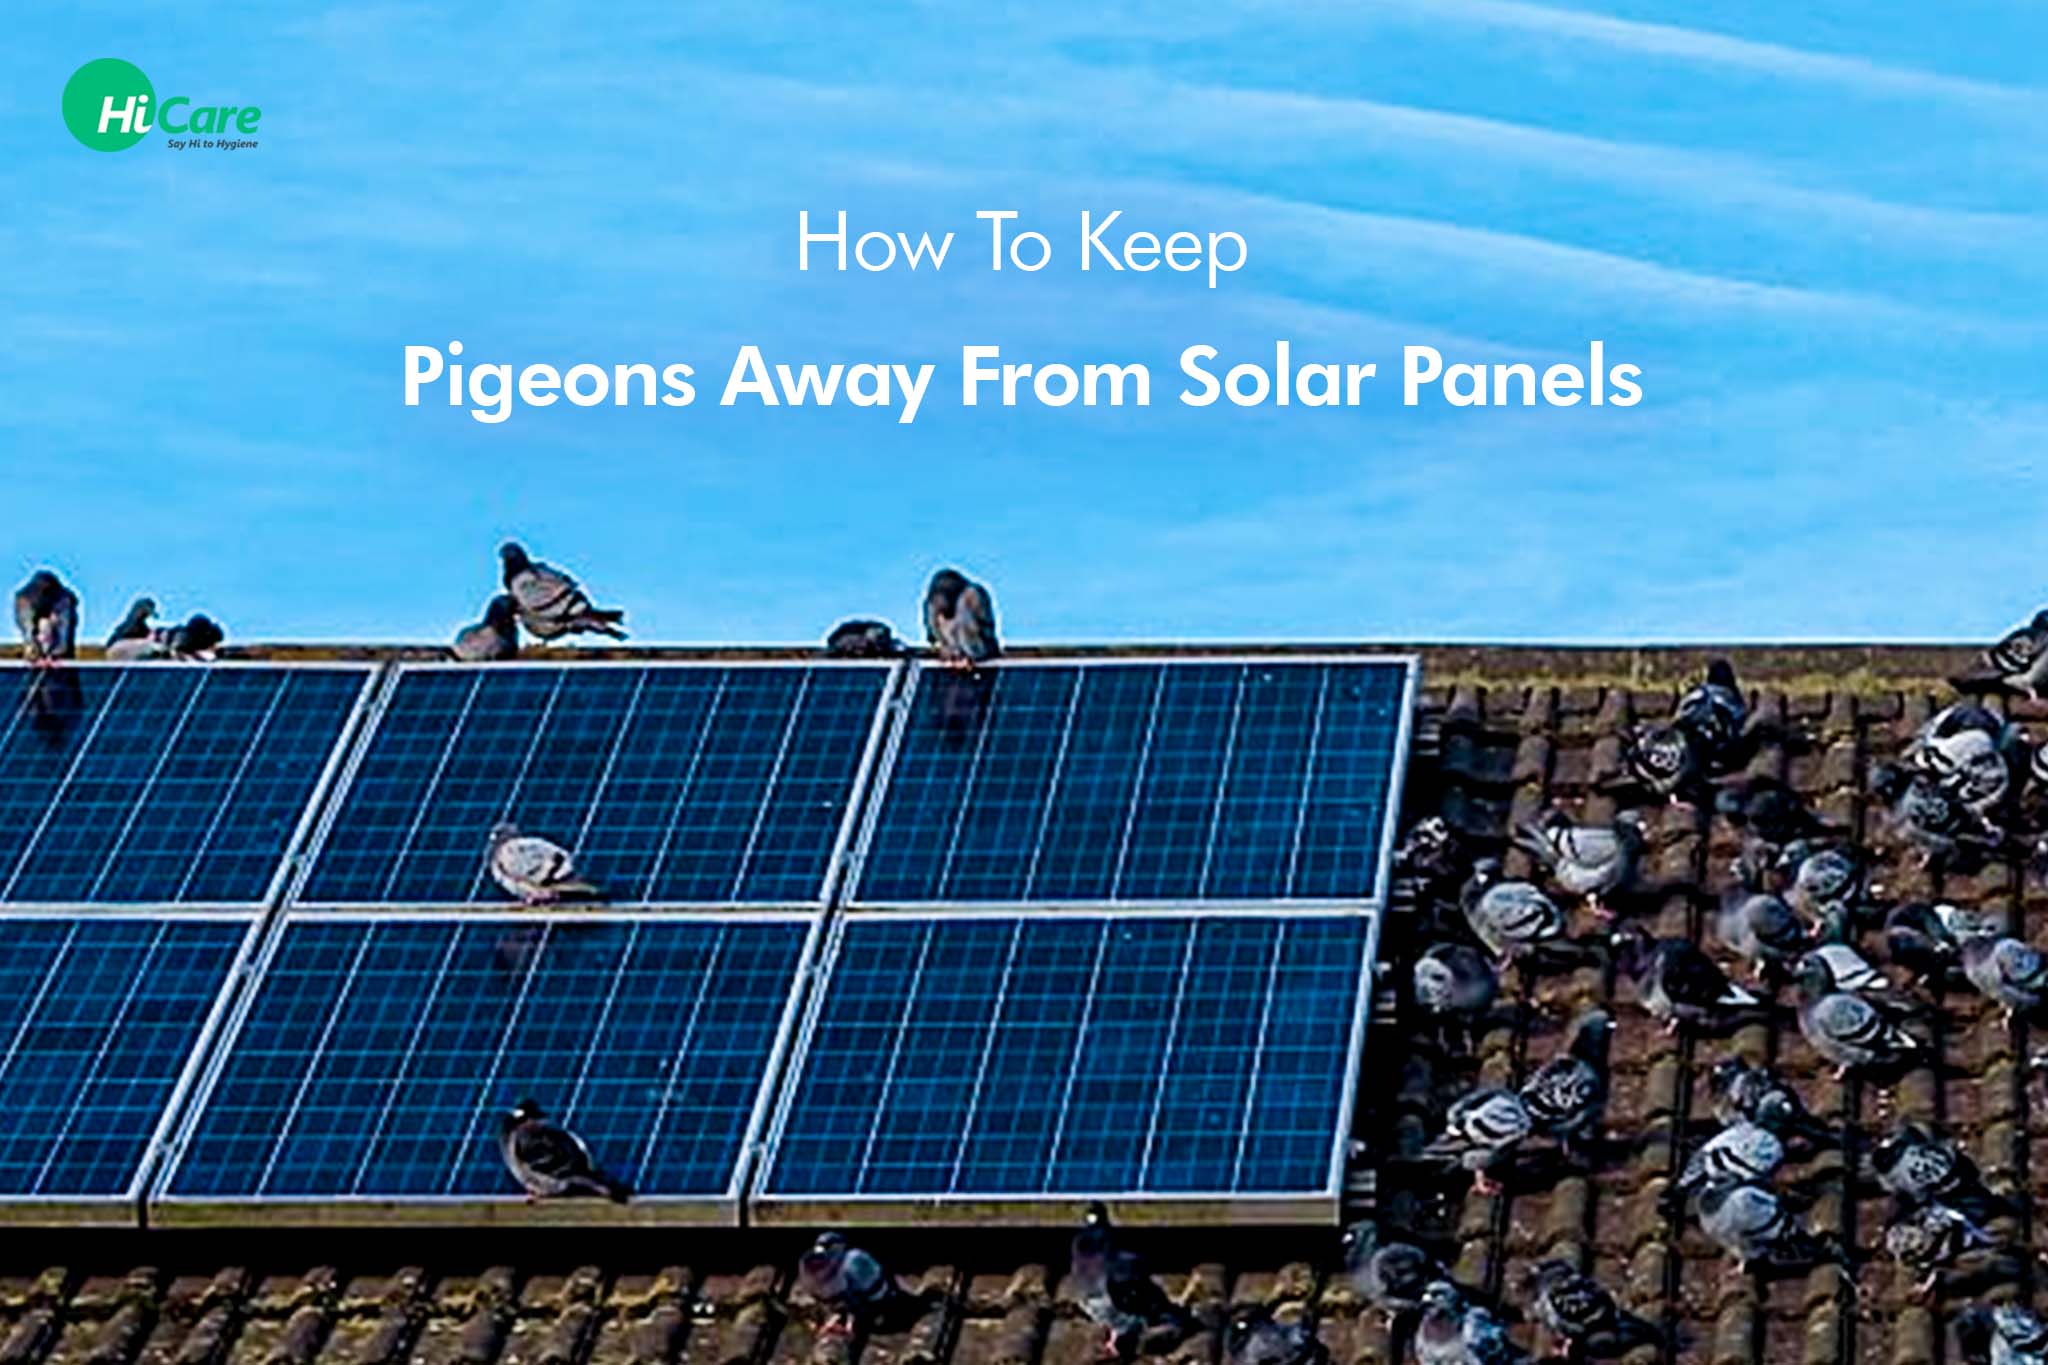 How To Keep Pigeons Away From Solar Panels?